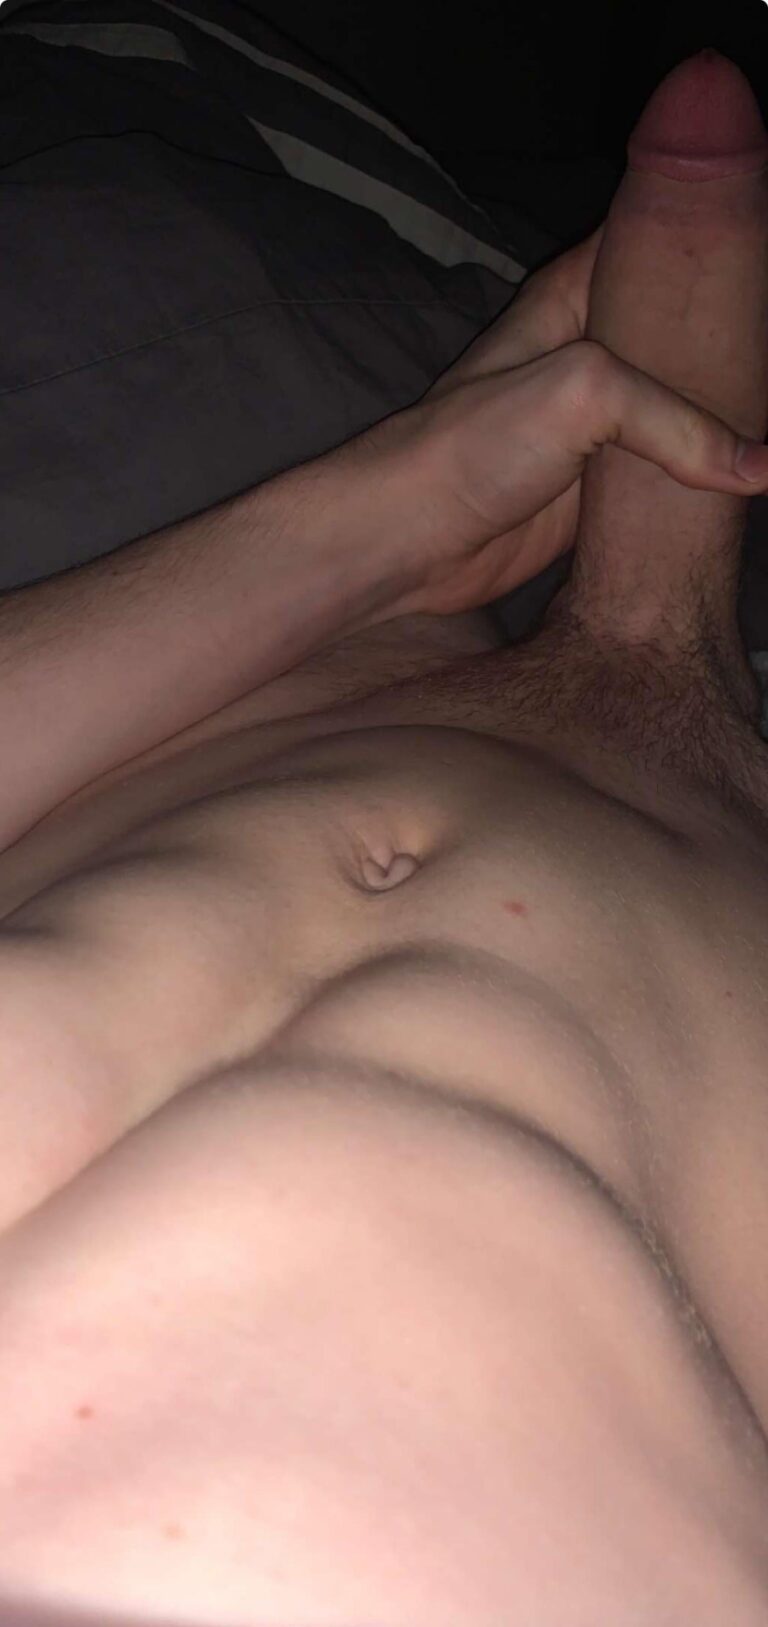 Does my 23 yo Montreal college bro dick turn you on? (Dms open for similar)